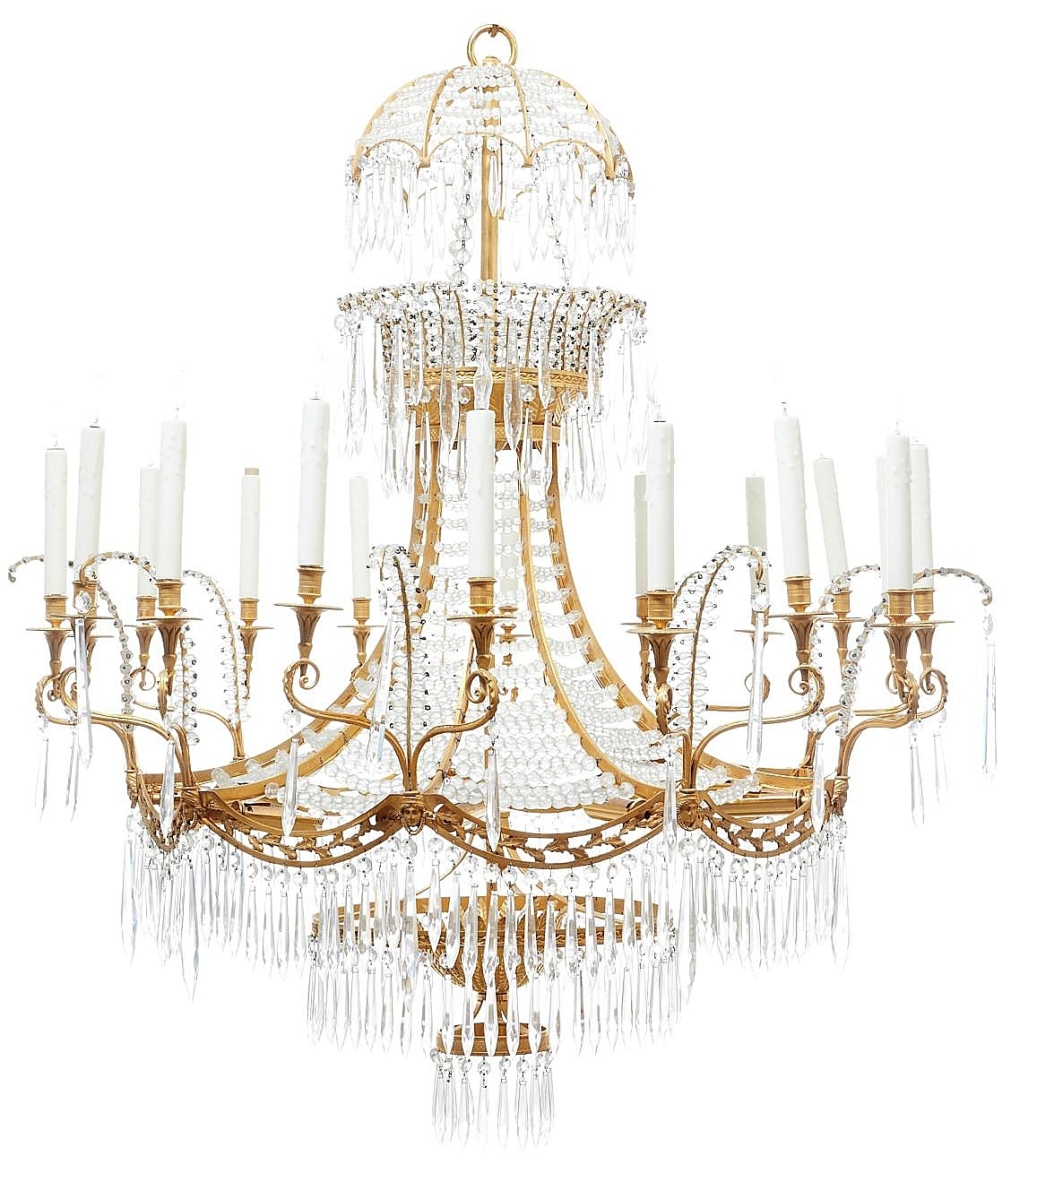 89 pairs of 18-light chandeliers from Maison Bagues